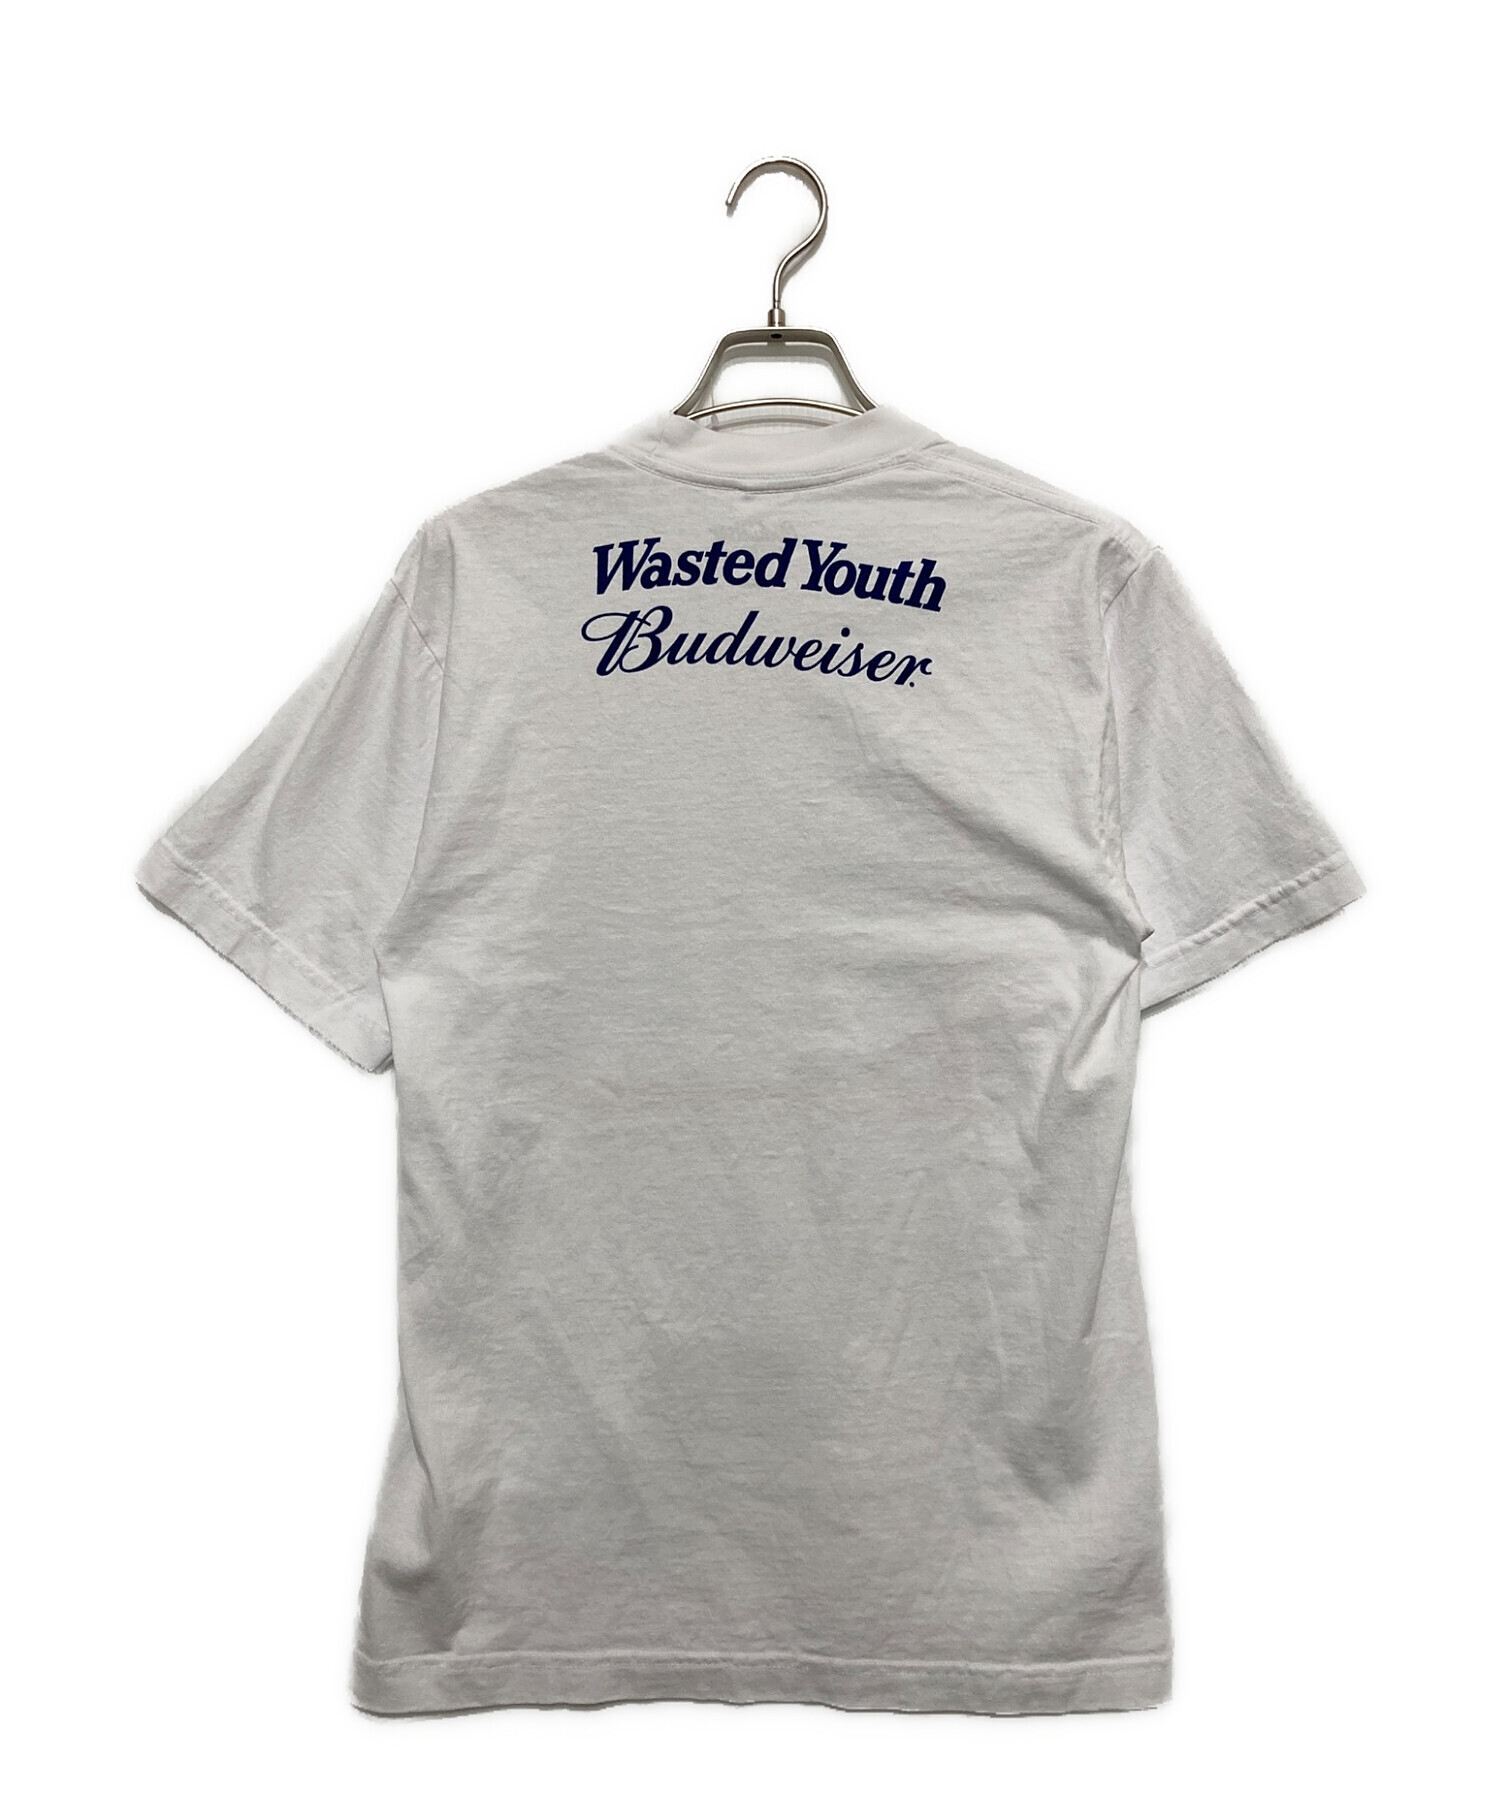 verdy wasted youth tee バドワイザー